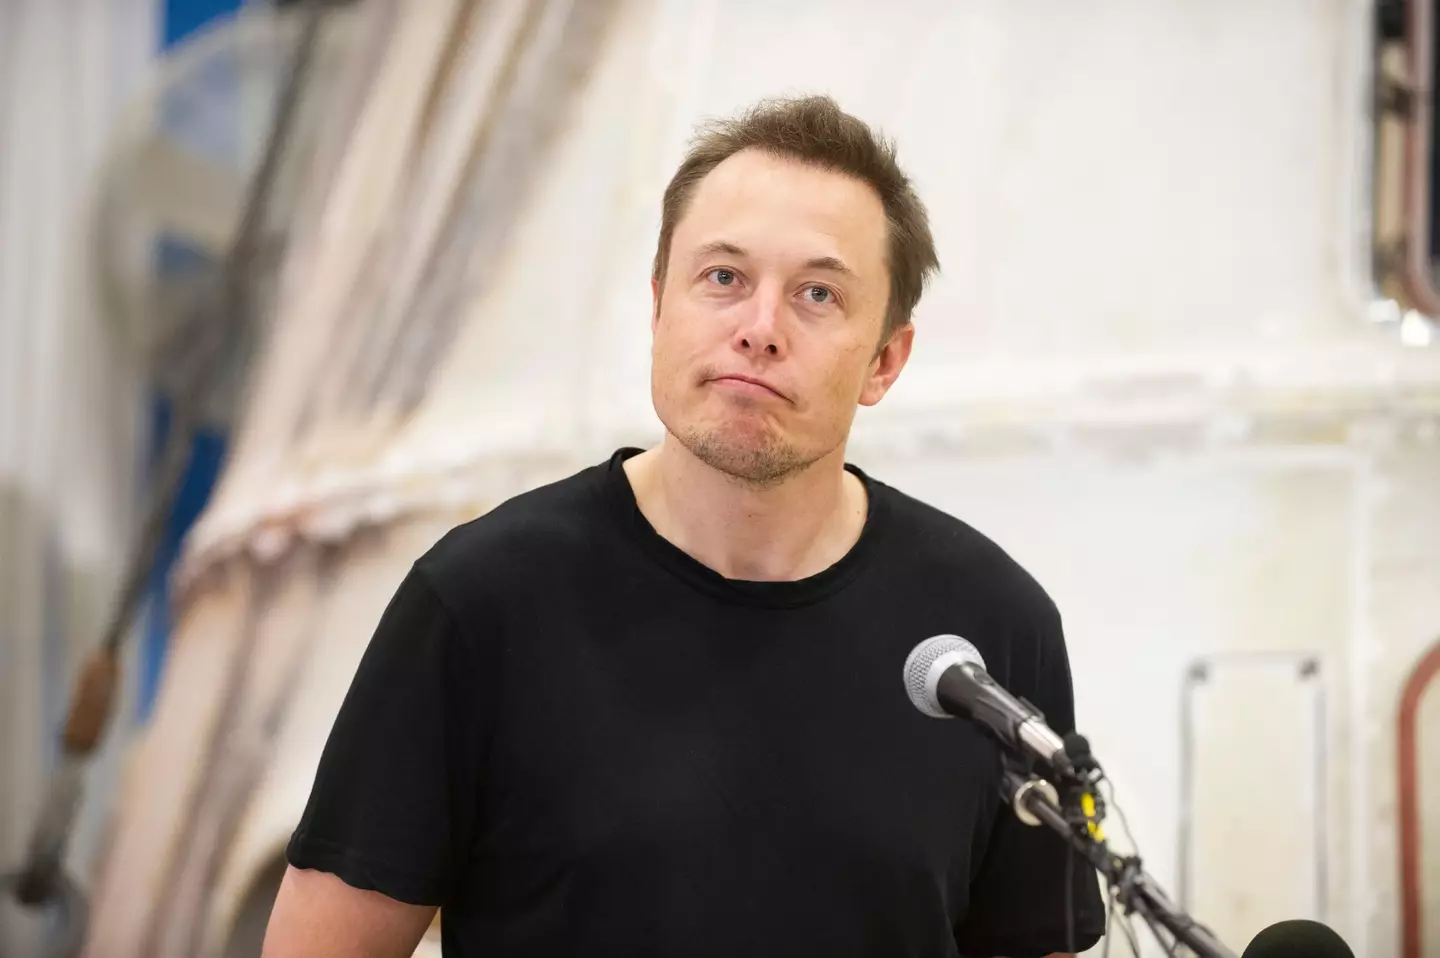 Elon Musk seemingly mocked the employee during a lengthy Twitter spat.